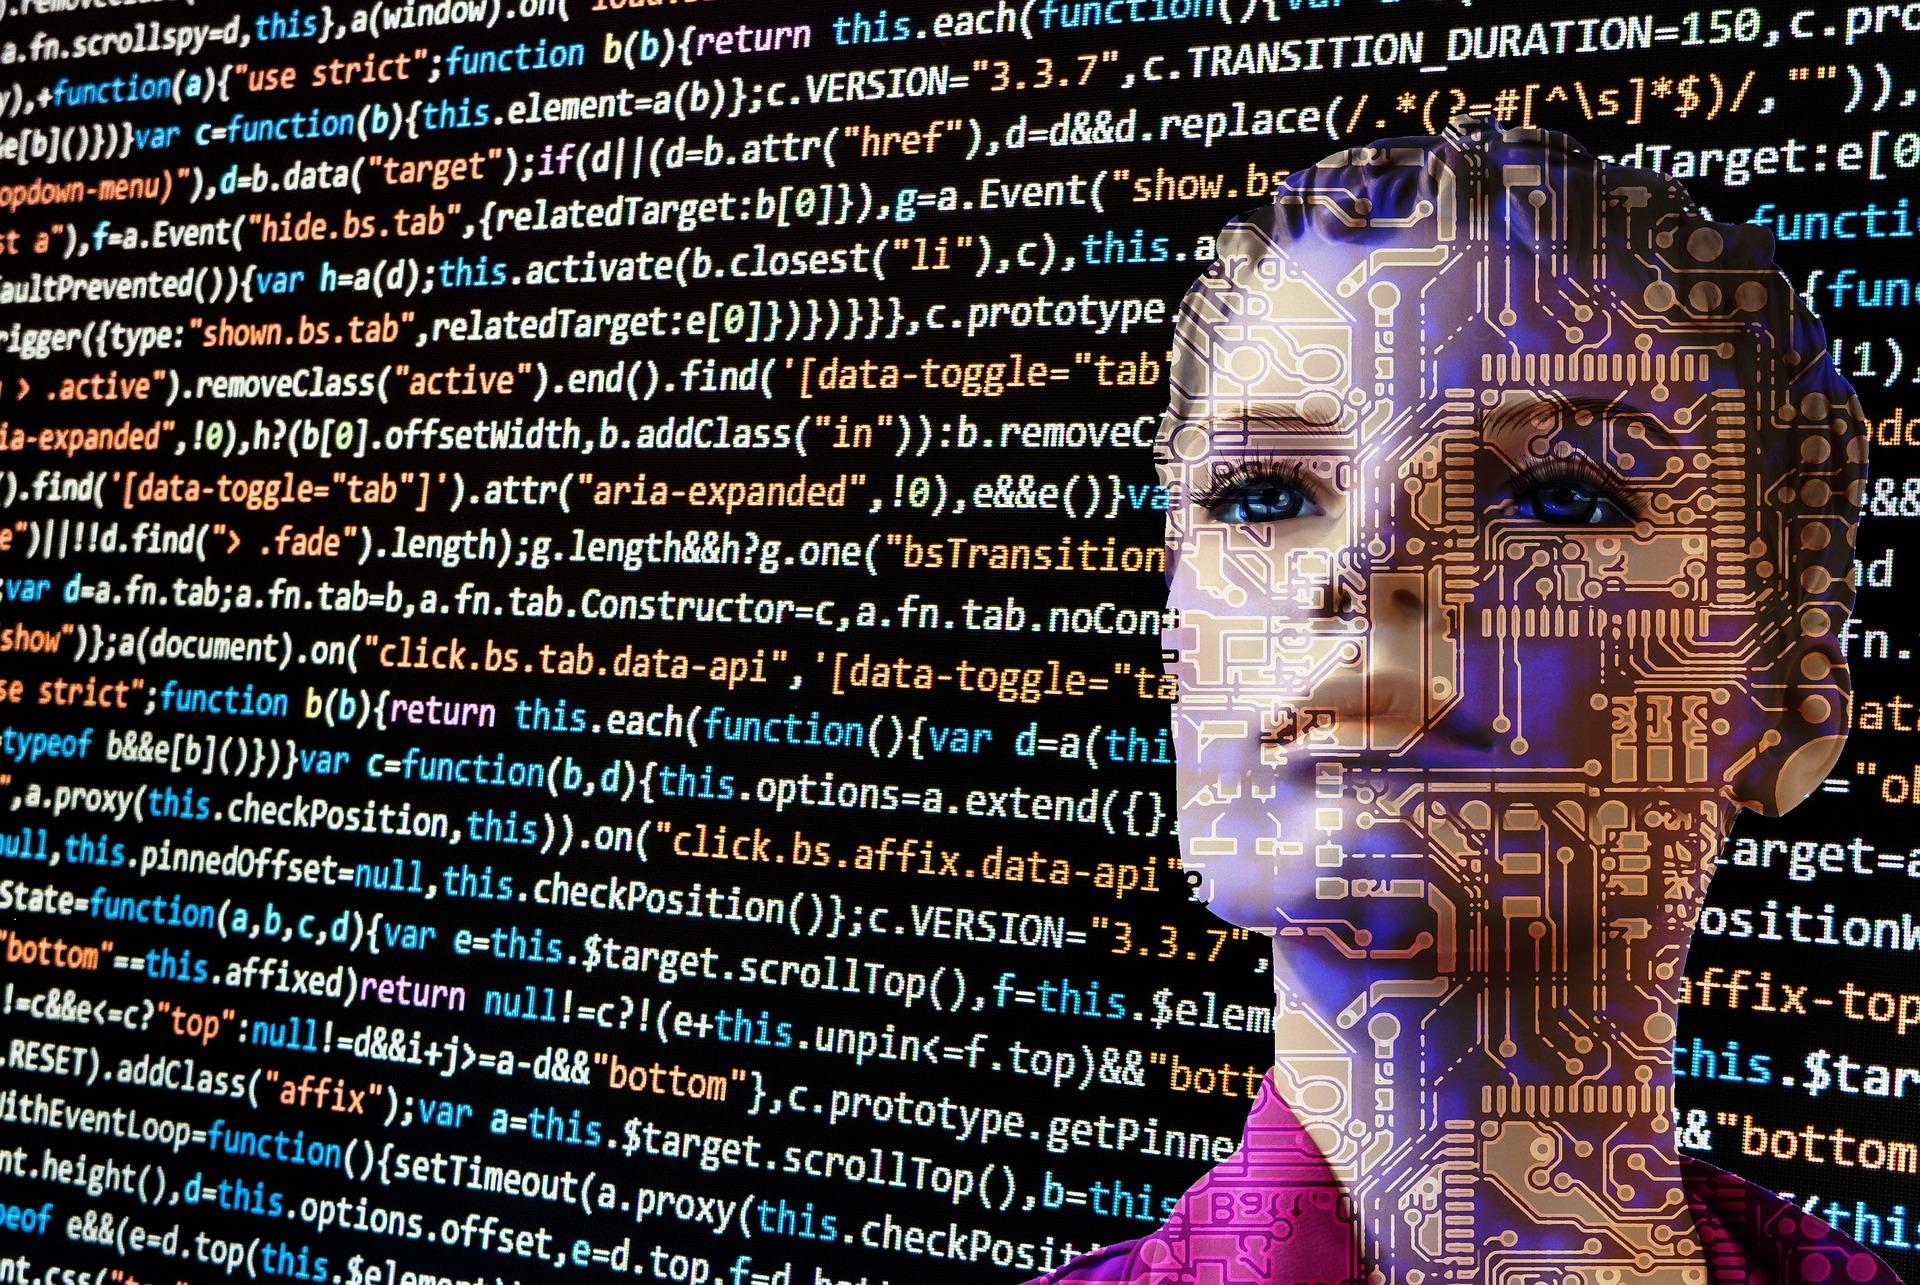 Robotic human face against a background of html code